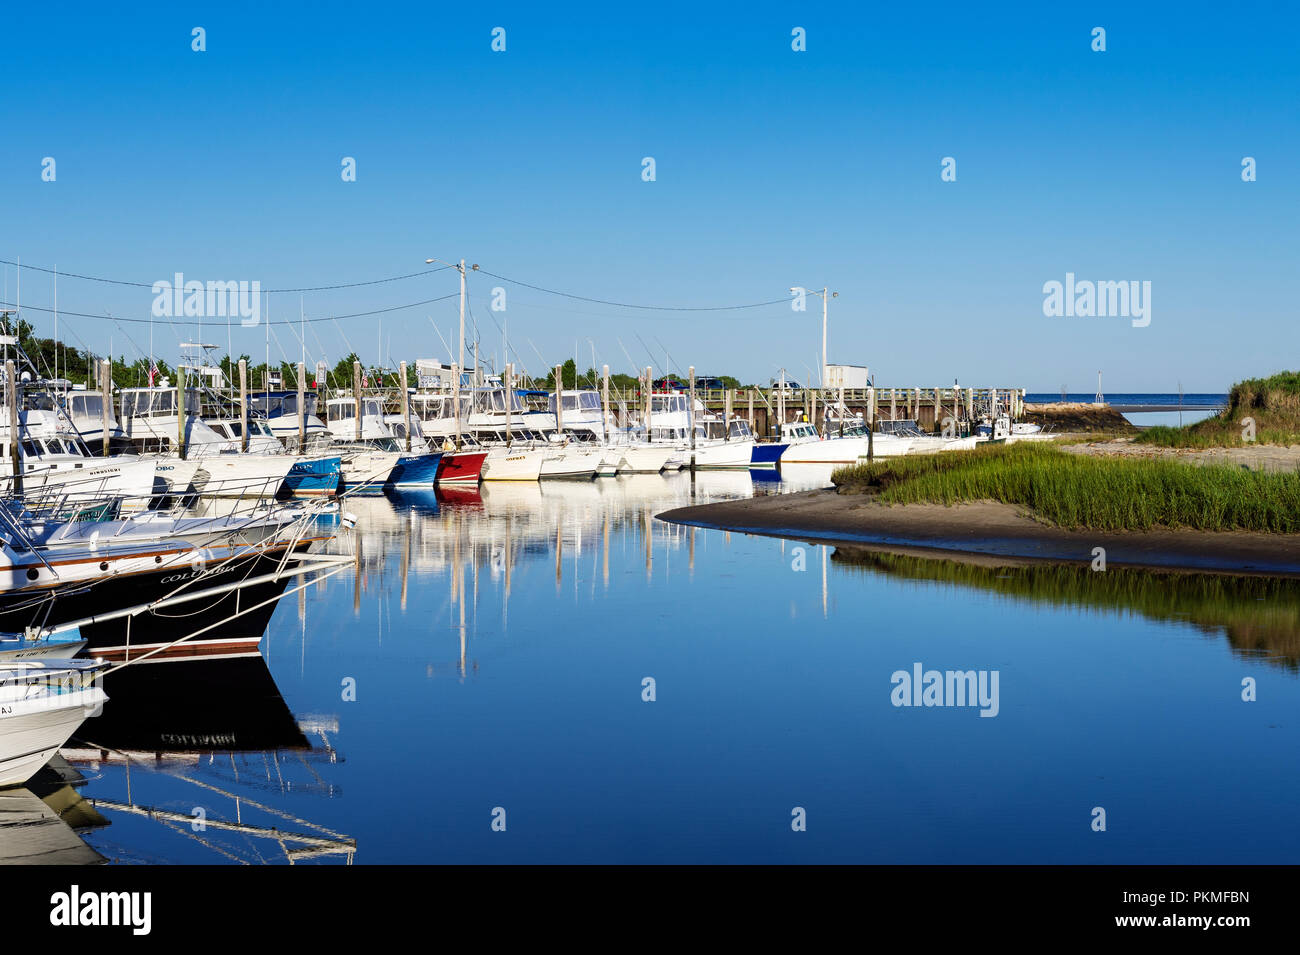 Charter fishing boats docked in Rock Harbor, Orleans, Cape Cod, Massachusetts, USA Stock Photo